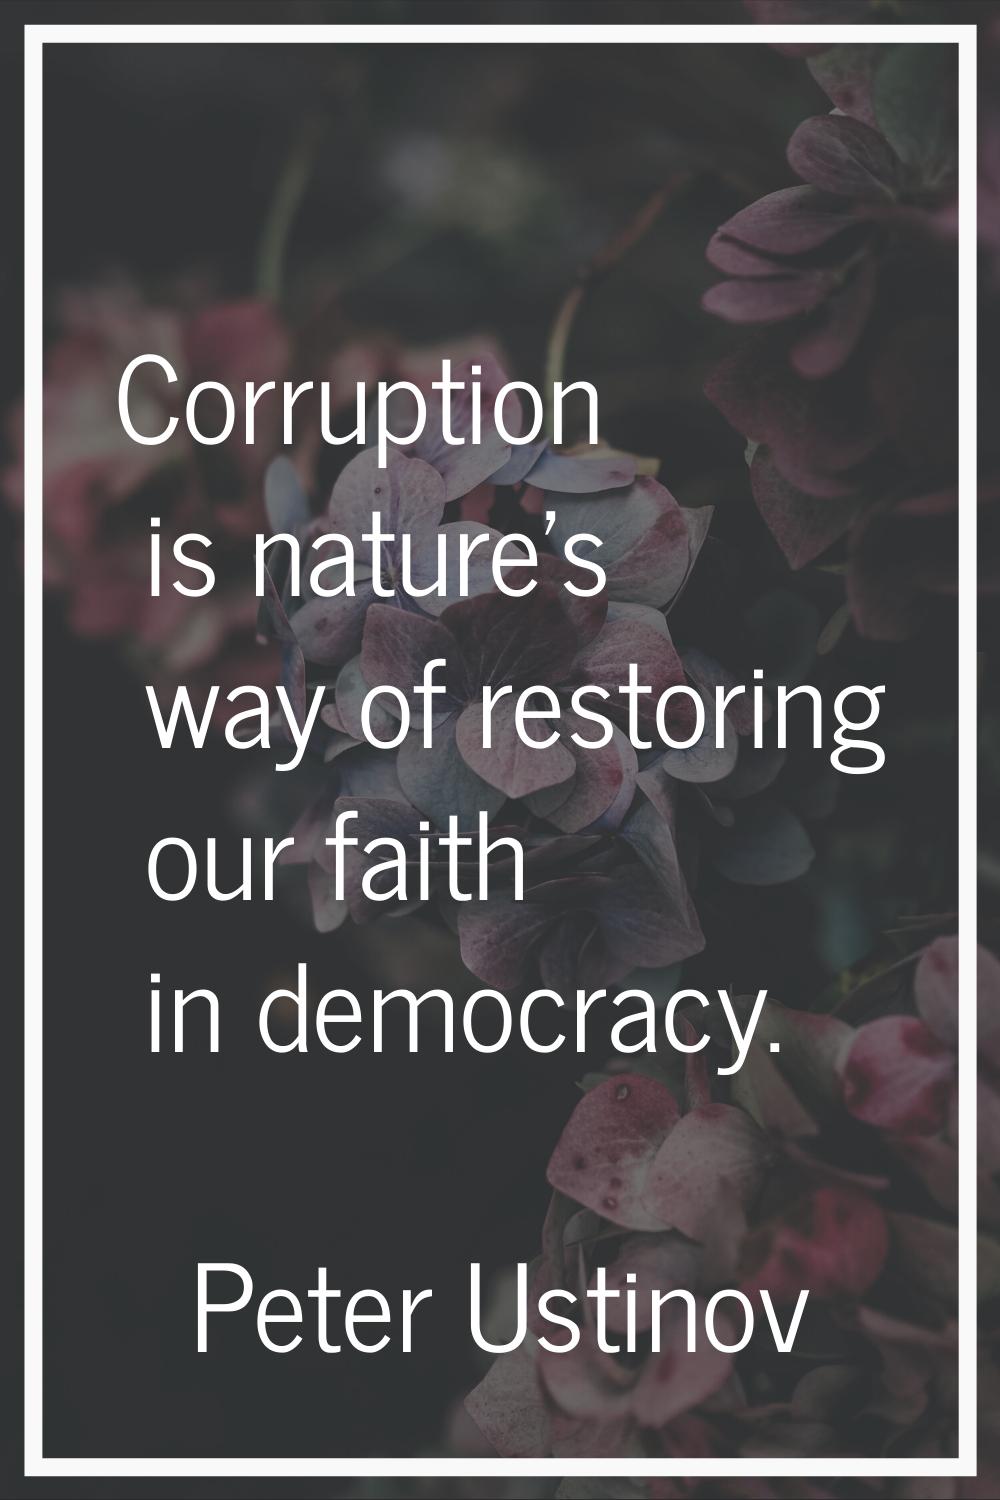 Corruption is nature's way of restoring our faith in democracy.